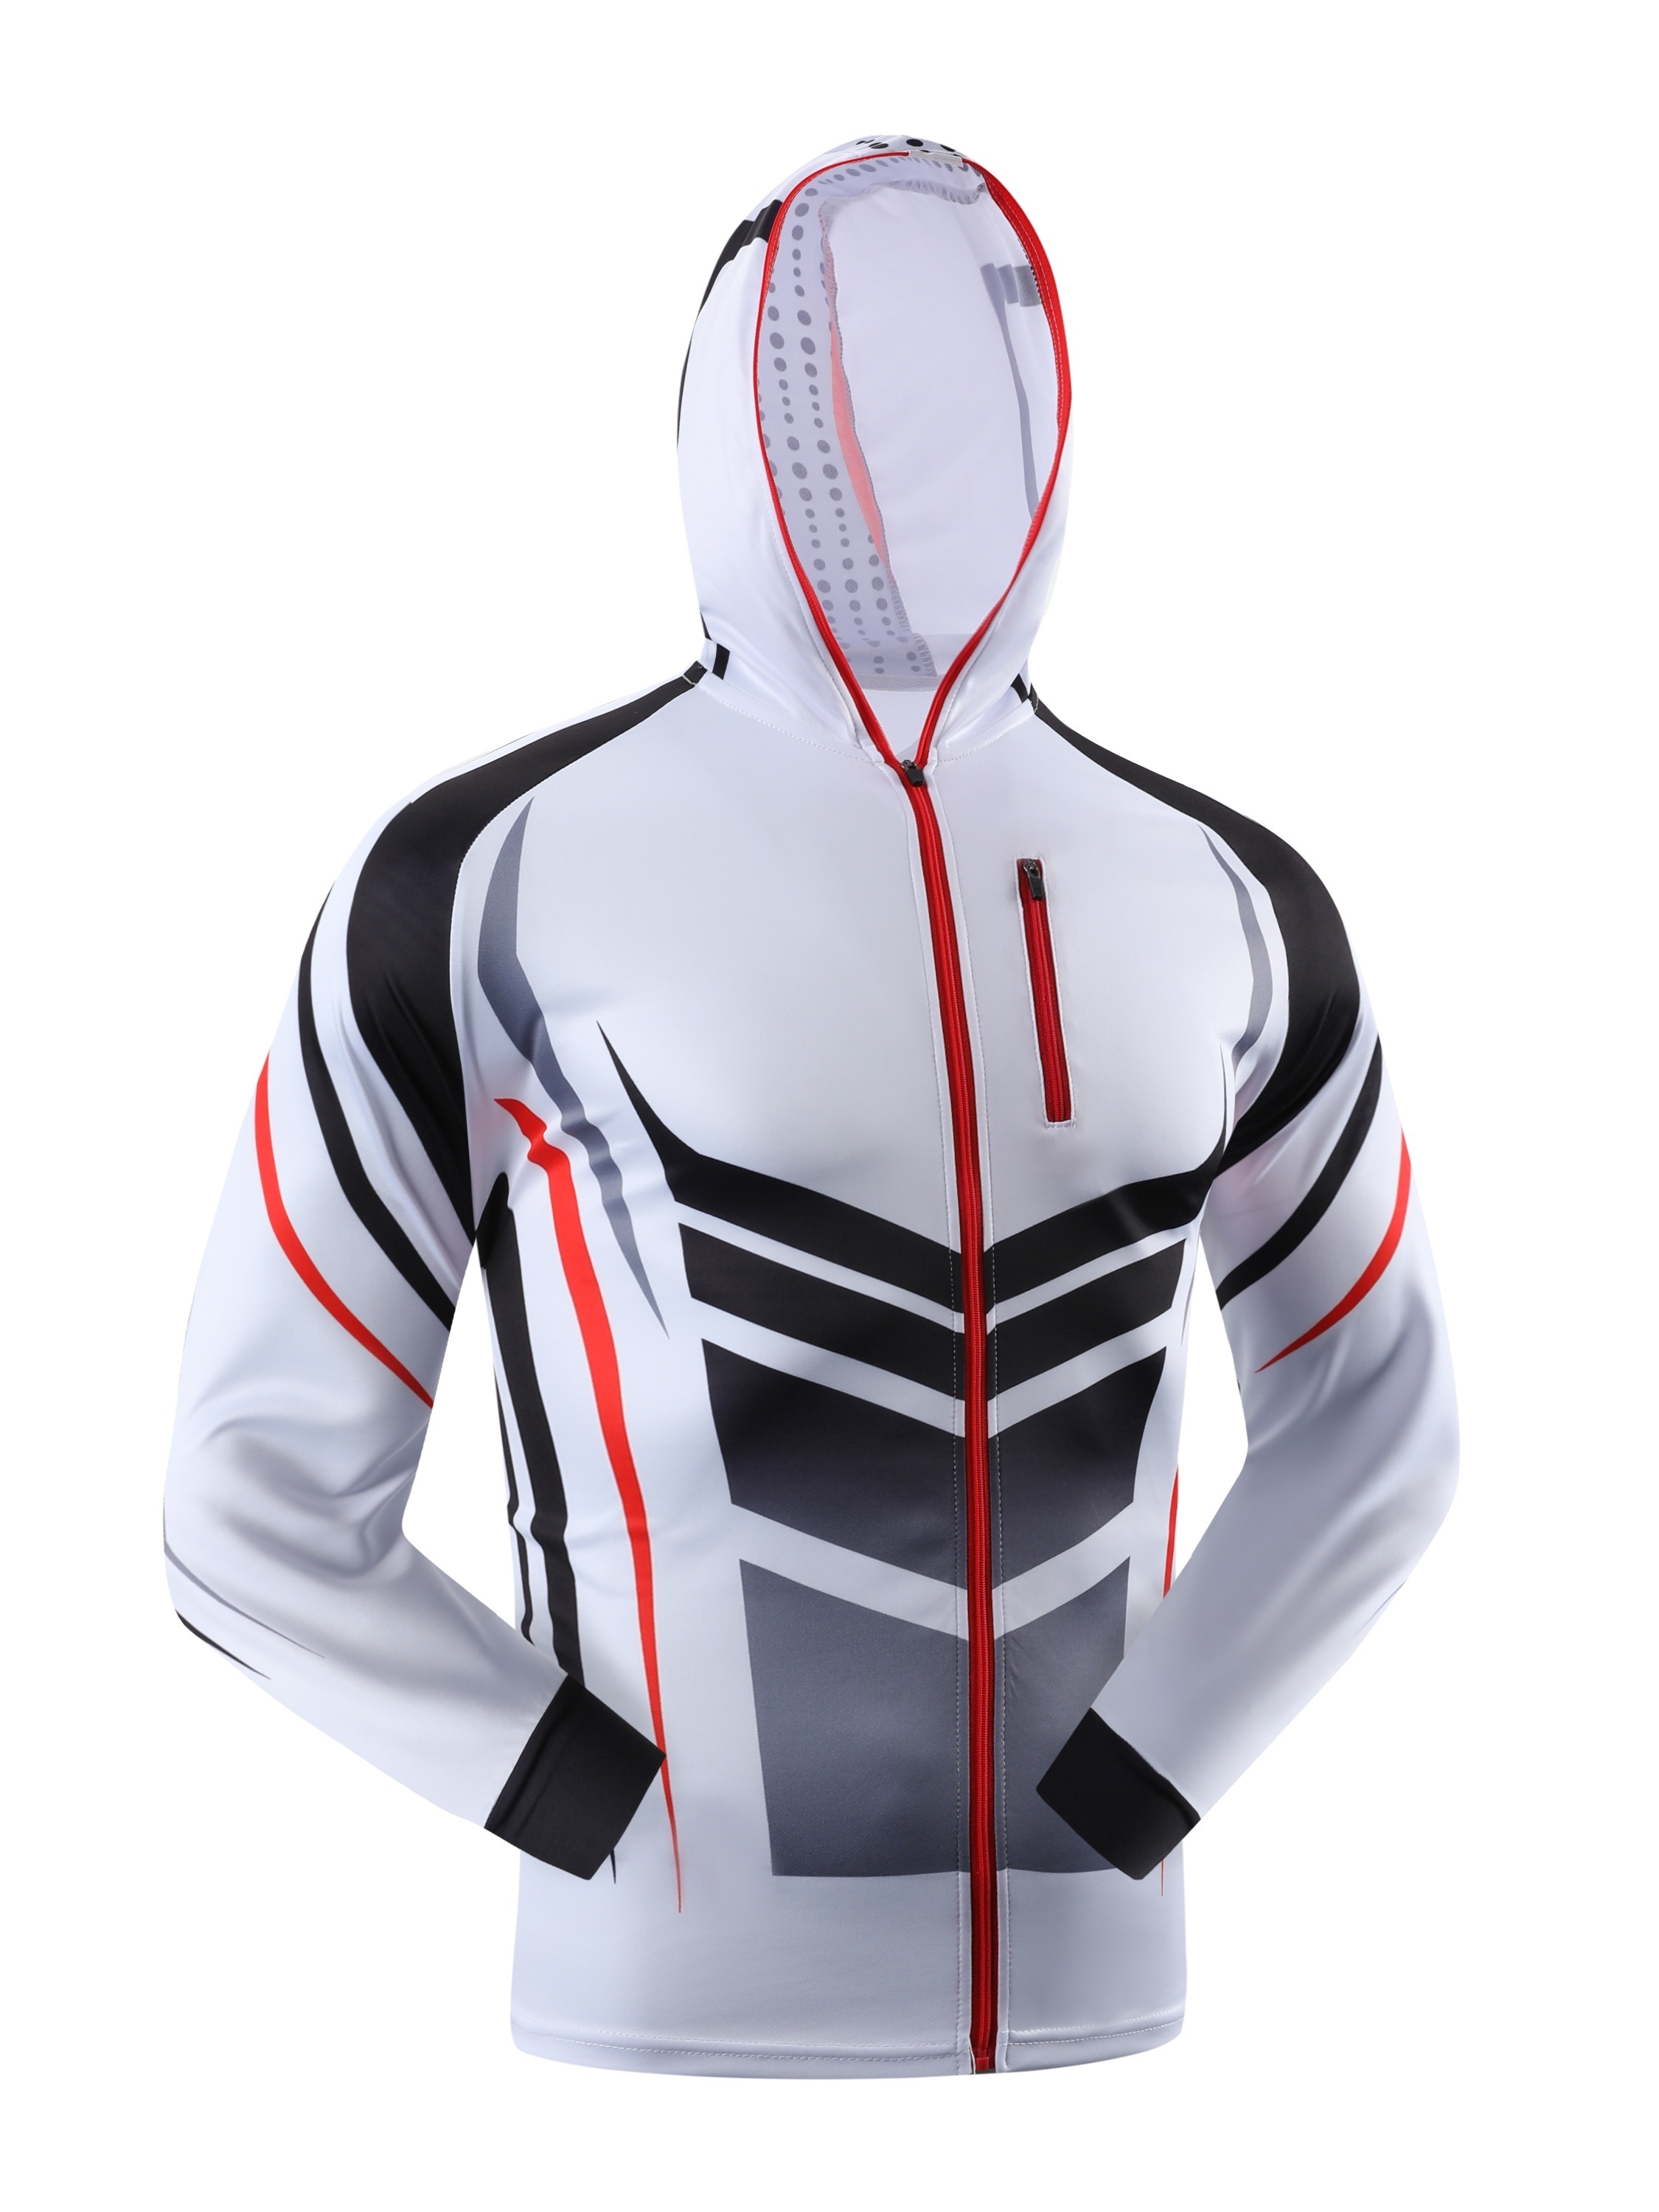 Sun Protection Hoodie Jacket with Mask Cooling Shirt for Golf Riding Fishing